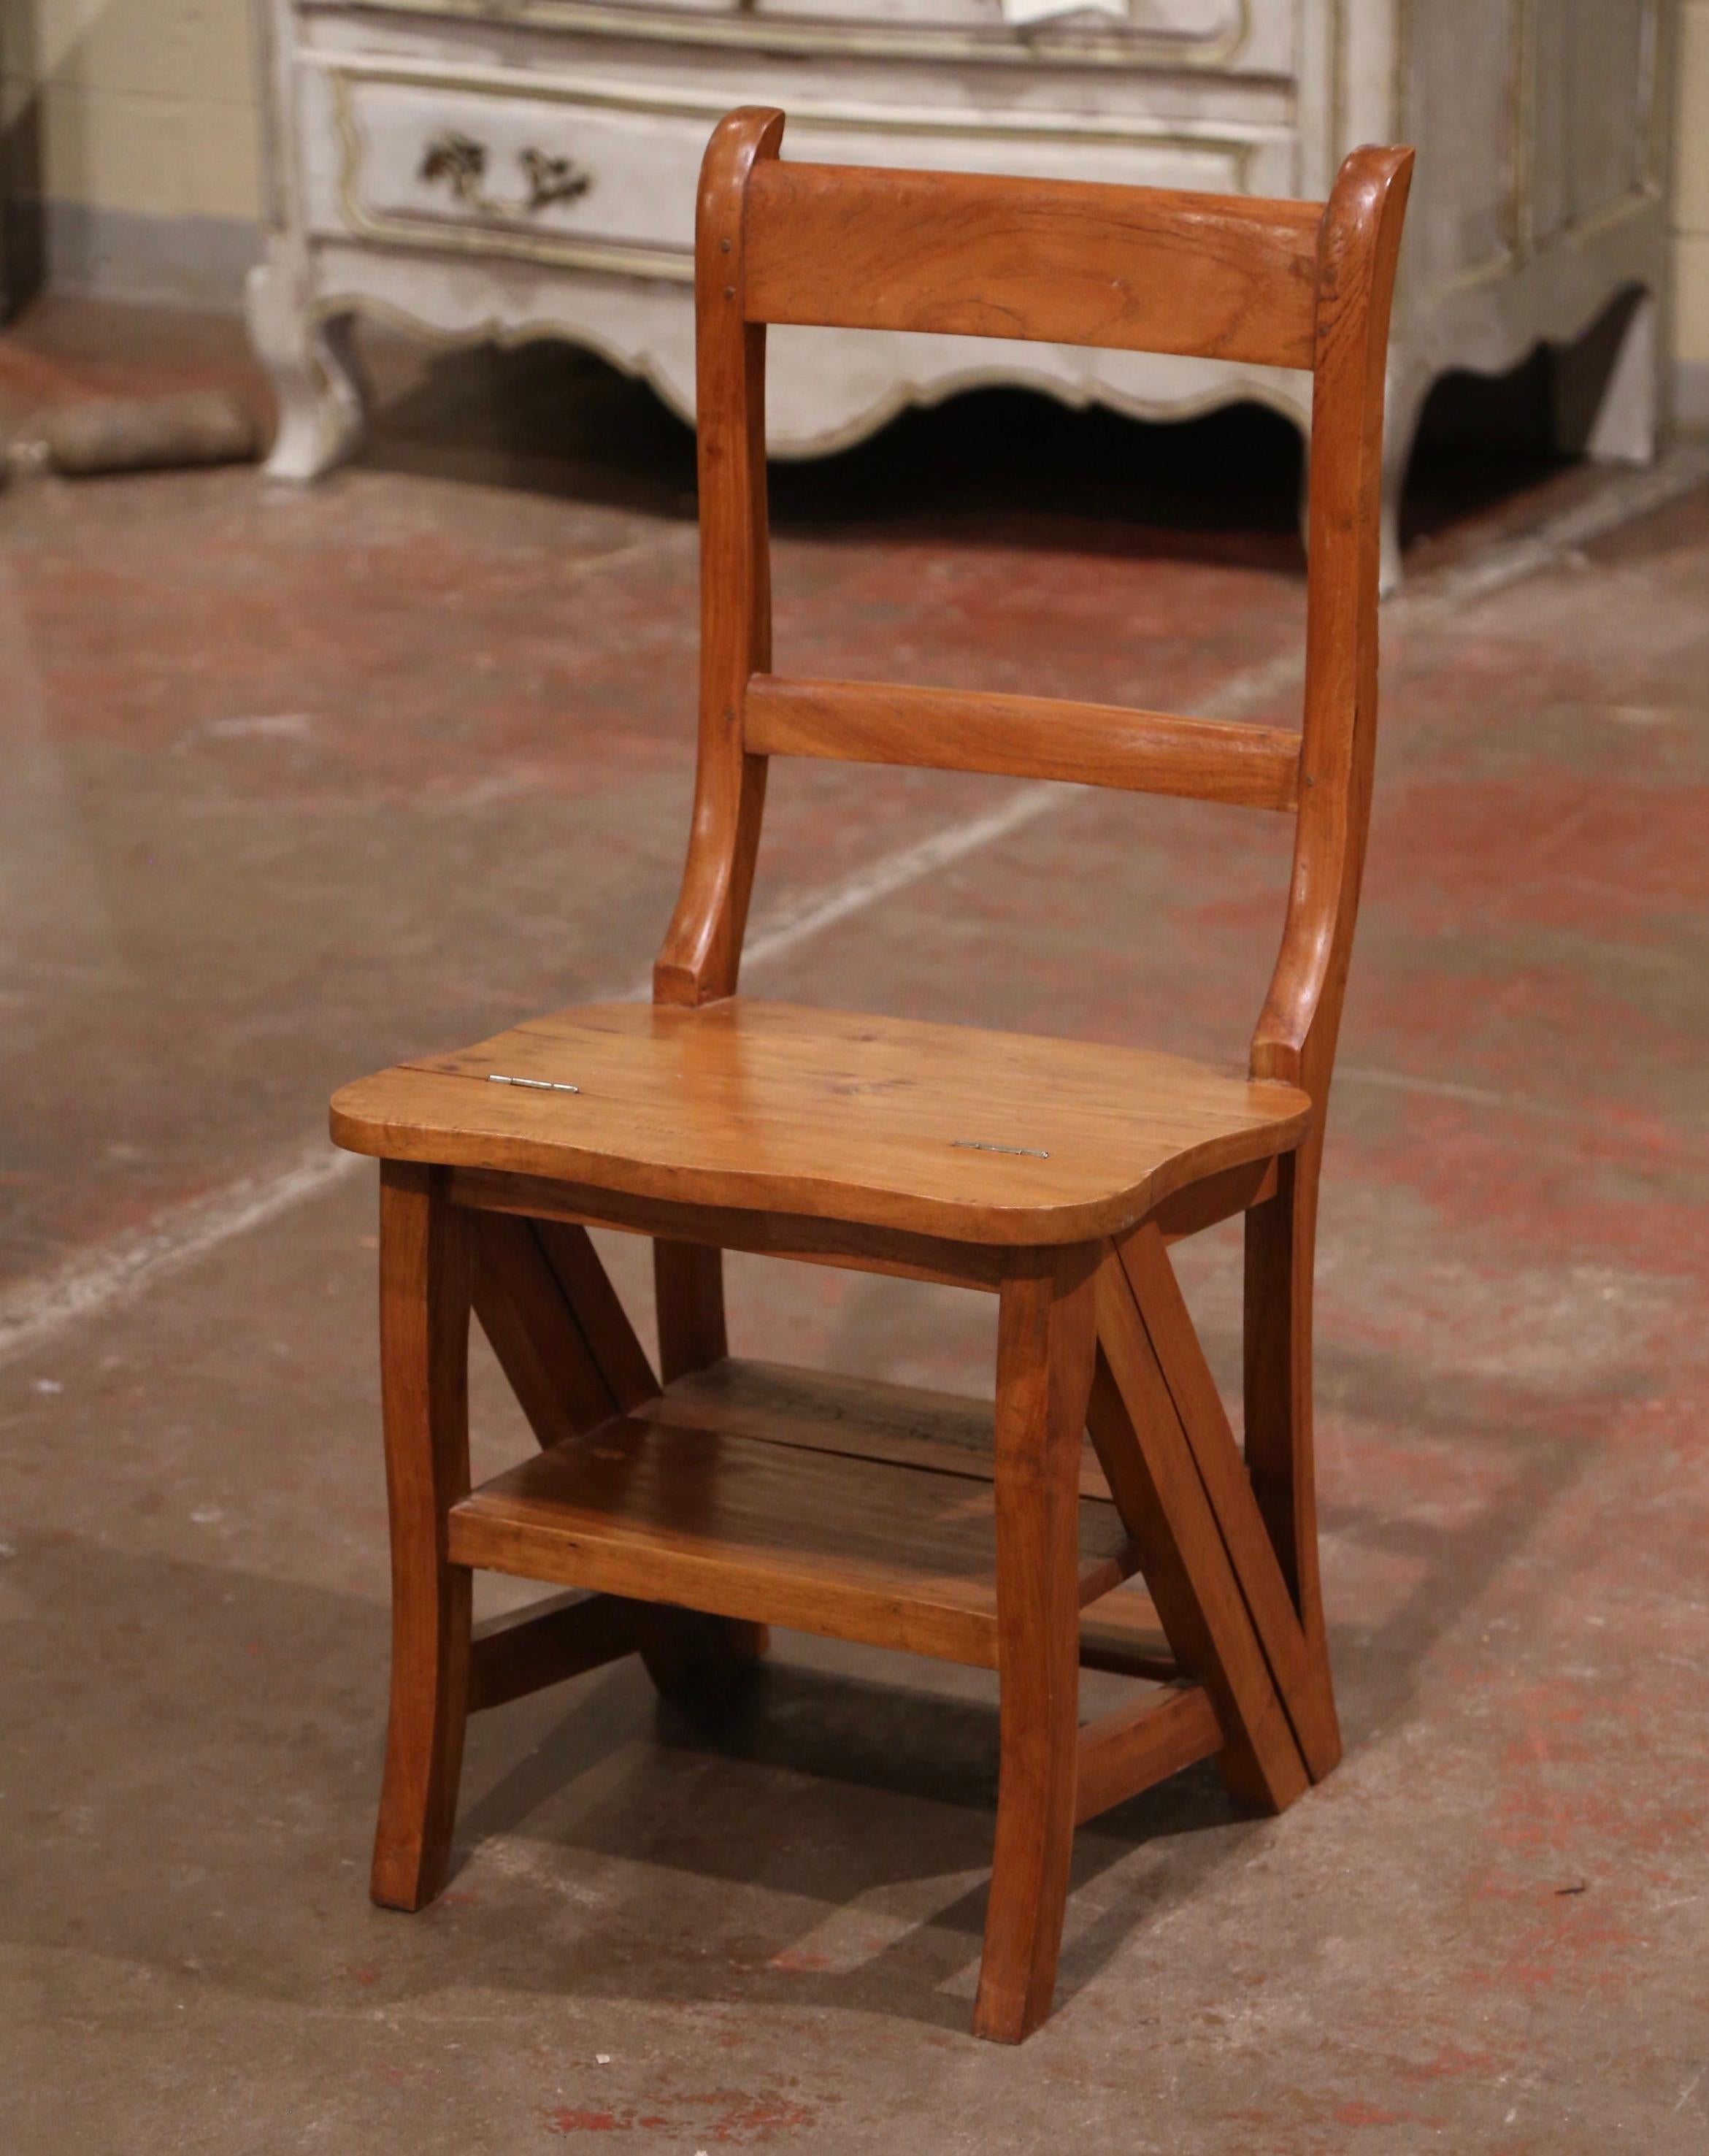 Decorate a library or study with this artisan-made folding step ladder chair. Crafted in Southern France circa 1920, the metamorphic chair features two carved ladders in the back; the double-function piece is hinged so that it can convert into a